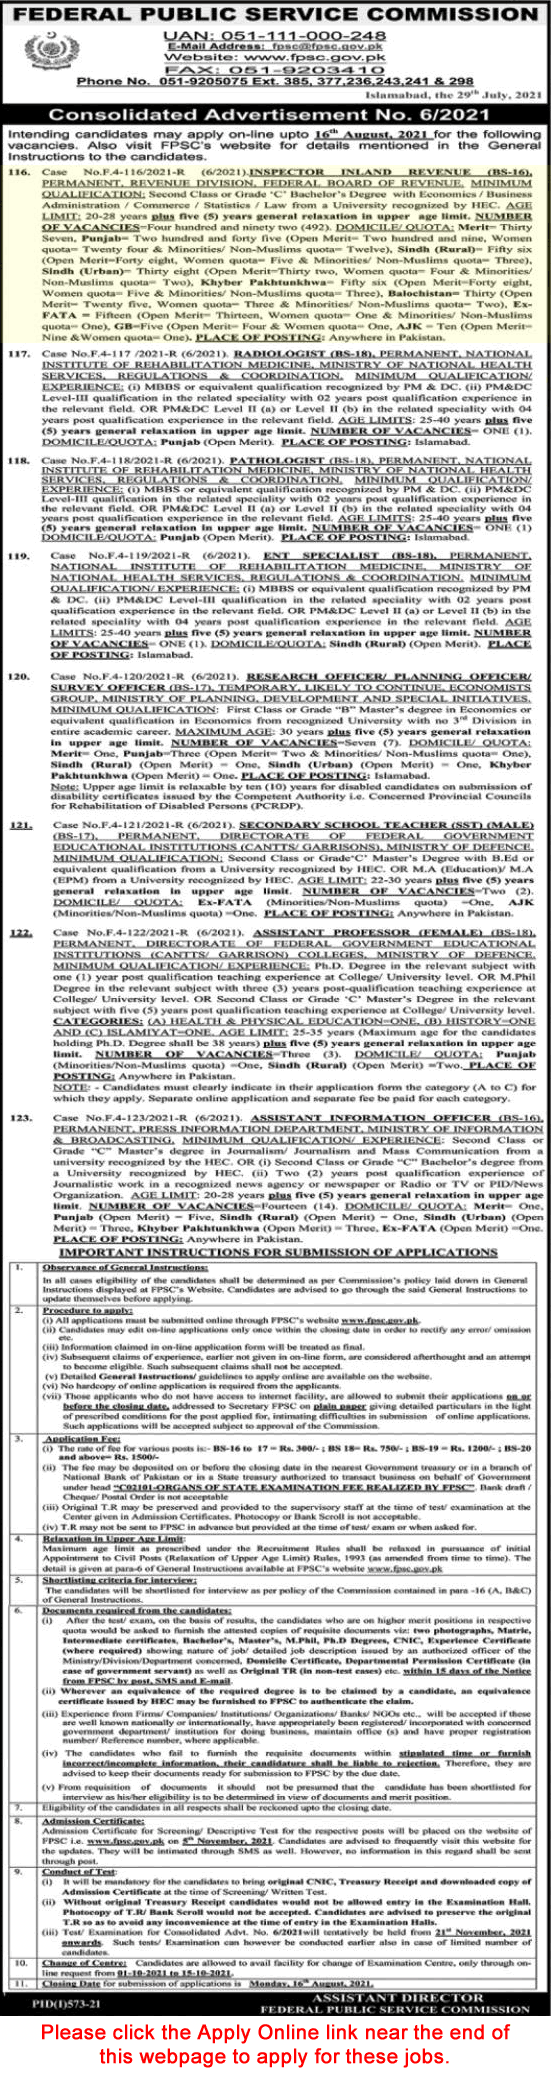 Inland Revenue Inspector Jobs in Federal Board of Revenue August 2021 FPSC Online Apply FBR Latest